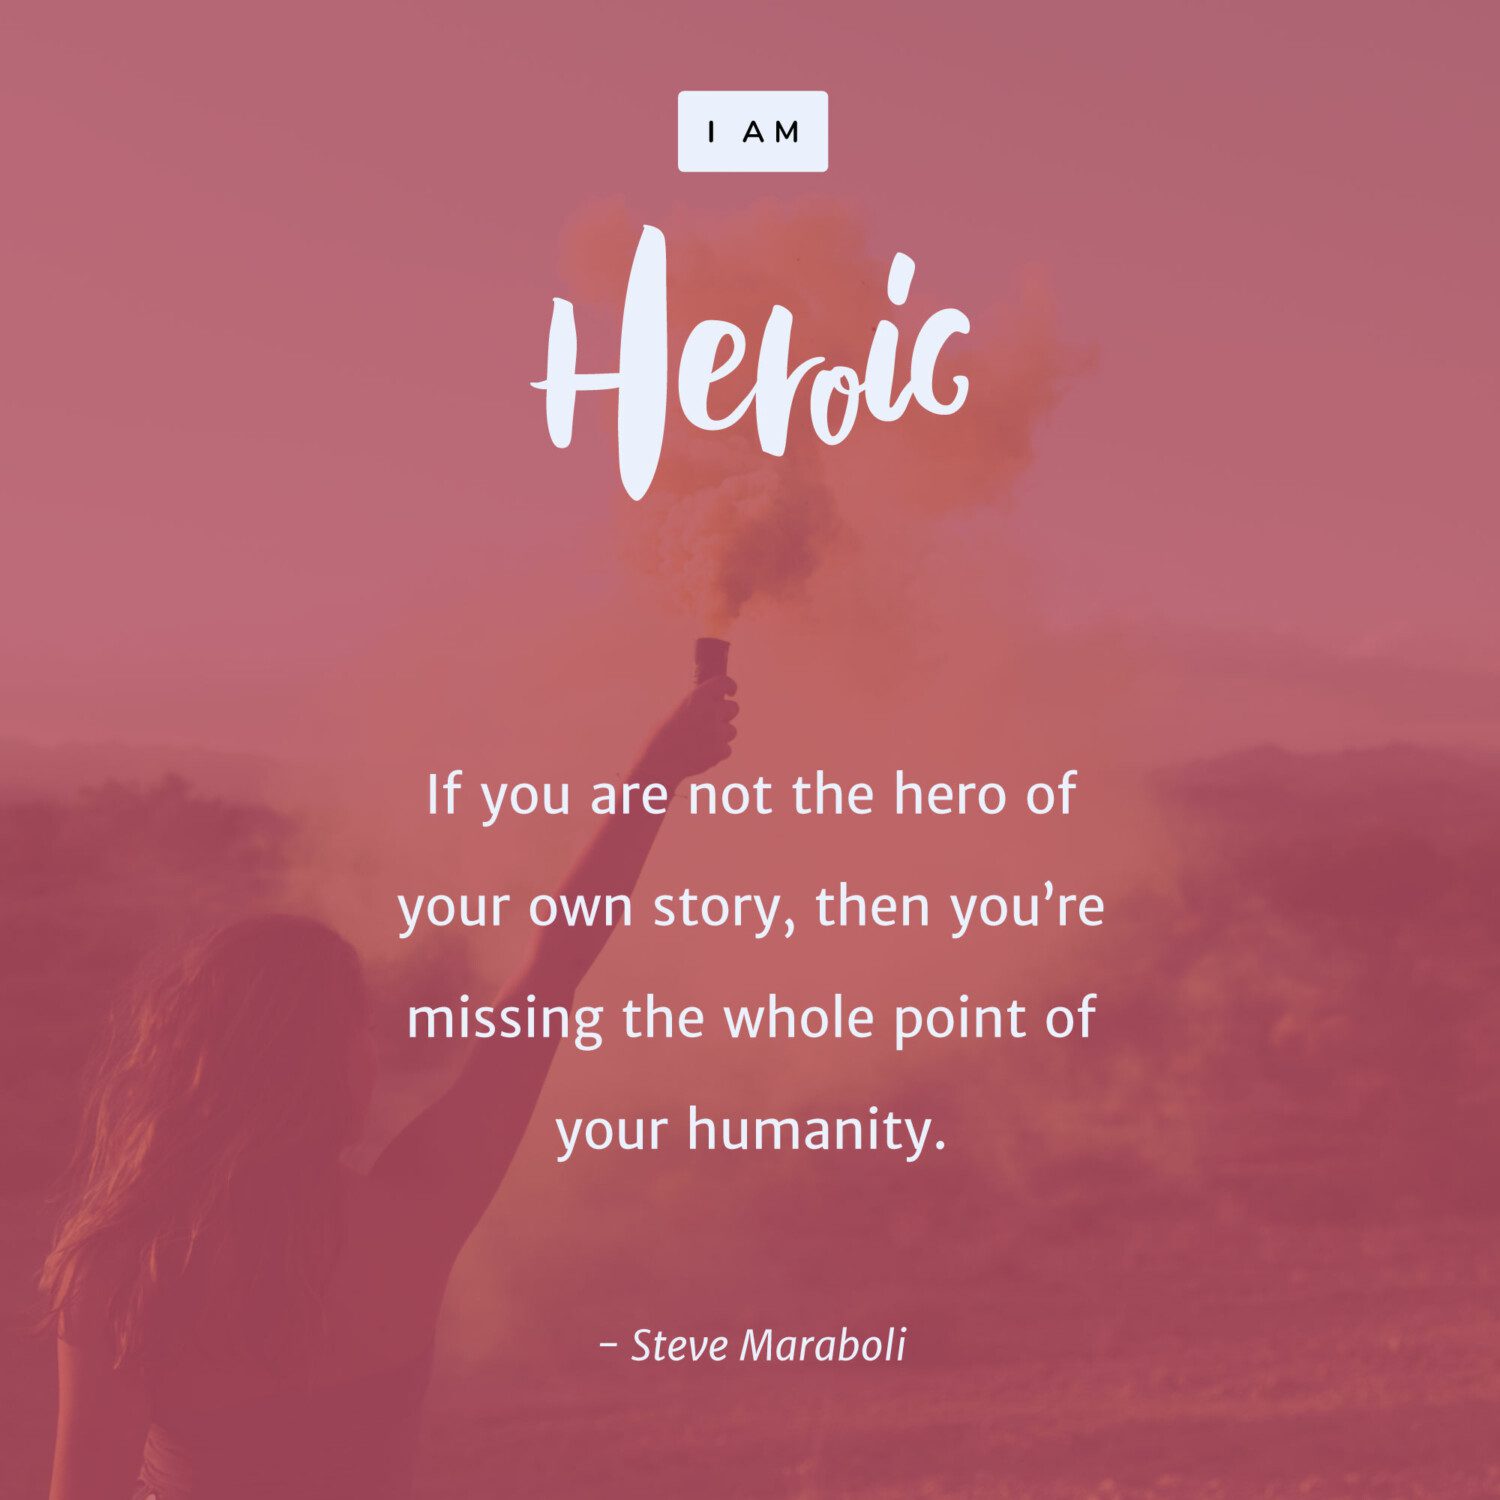 "If you are not the hero of your own story, then you’re missing the whole point of your humanity."